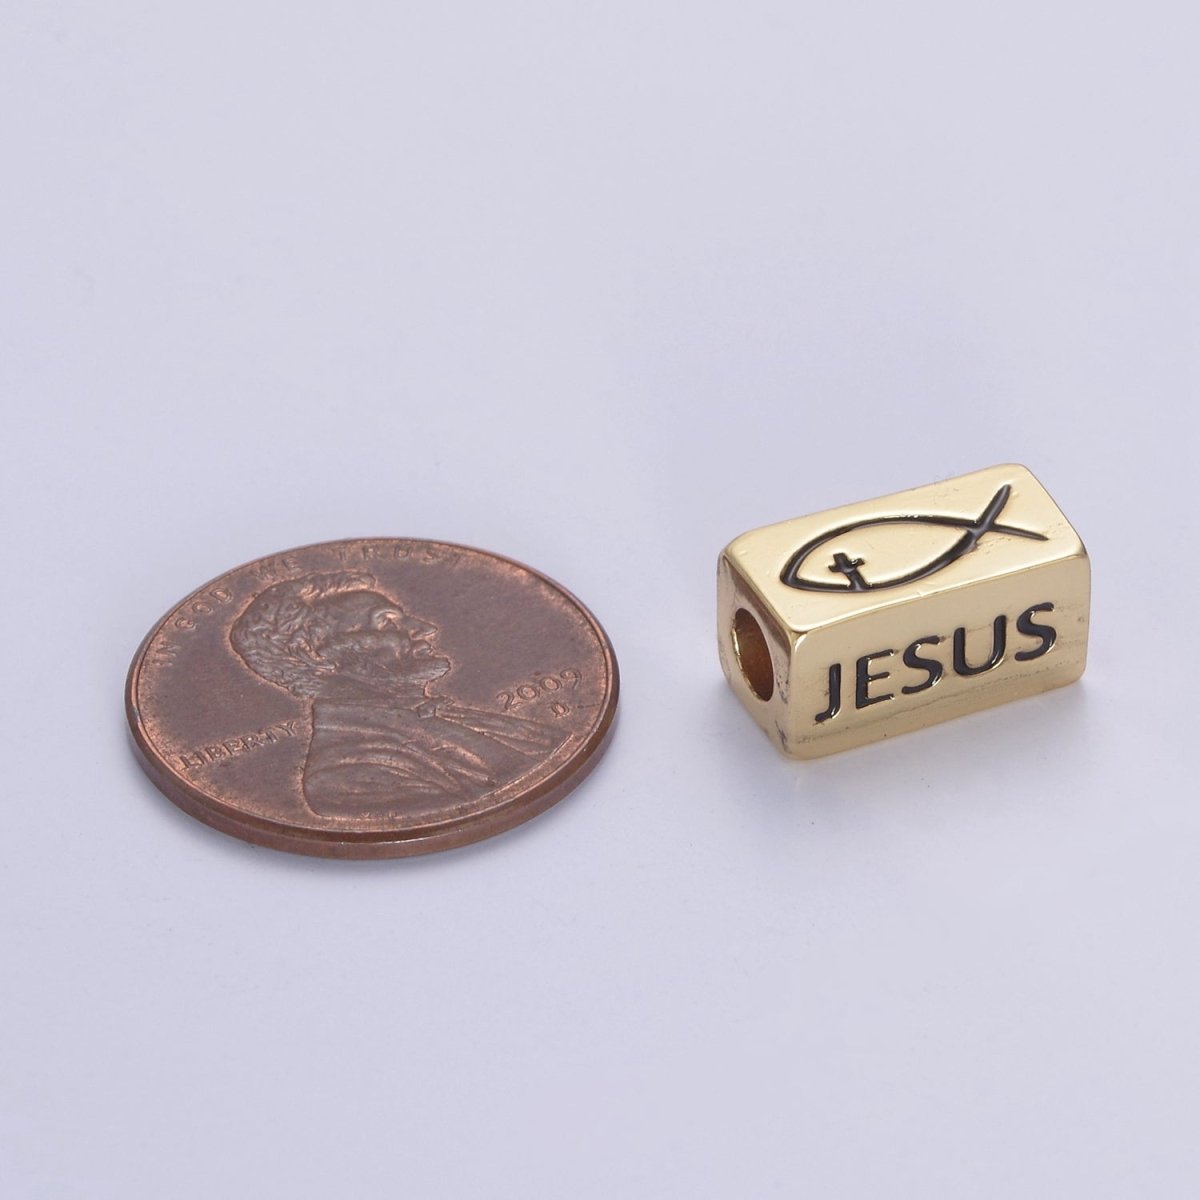 Dainty 14kt Gold Filled Religious Square Tube Bead - Seamless Rectangular Bead - Wholesale - Findings- Jewelry Making Spacer Bead B-173 - DLUXCA